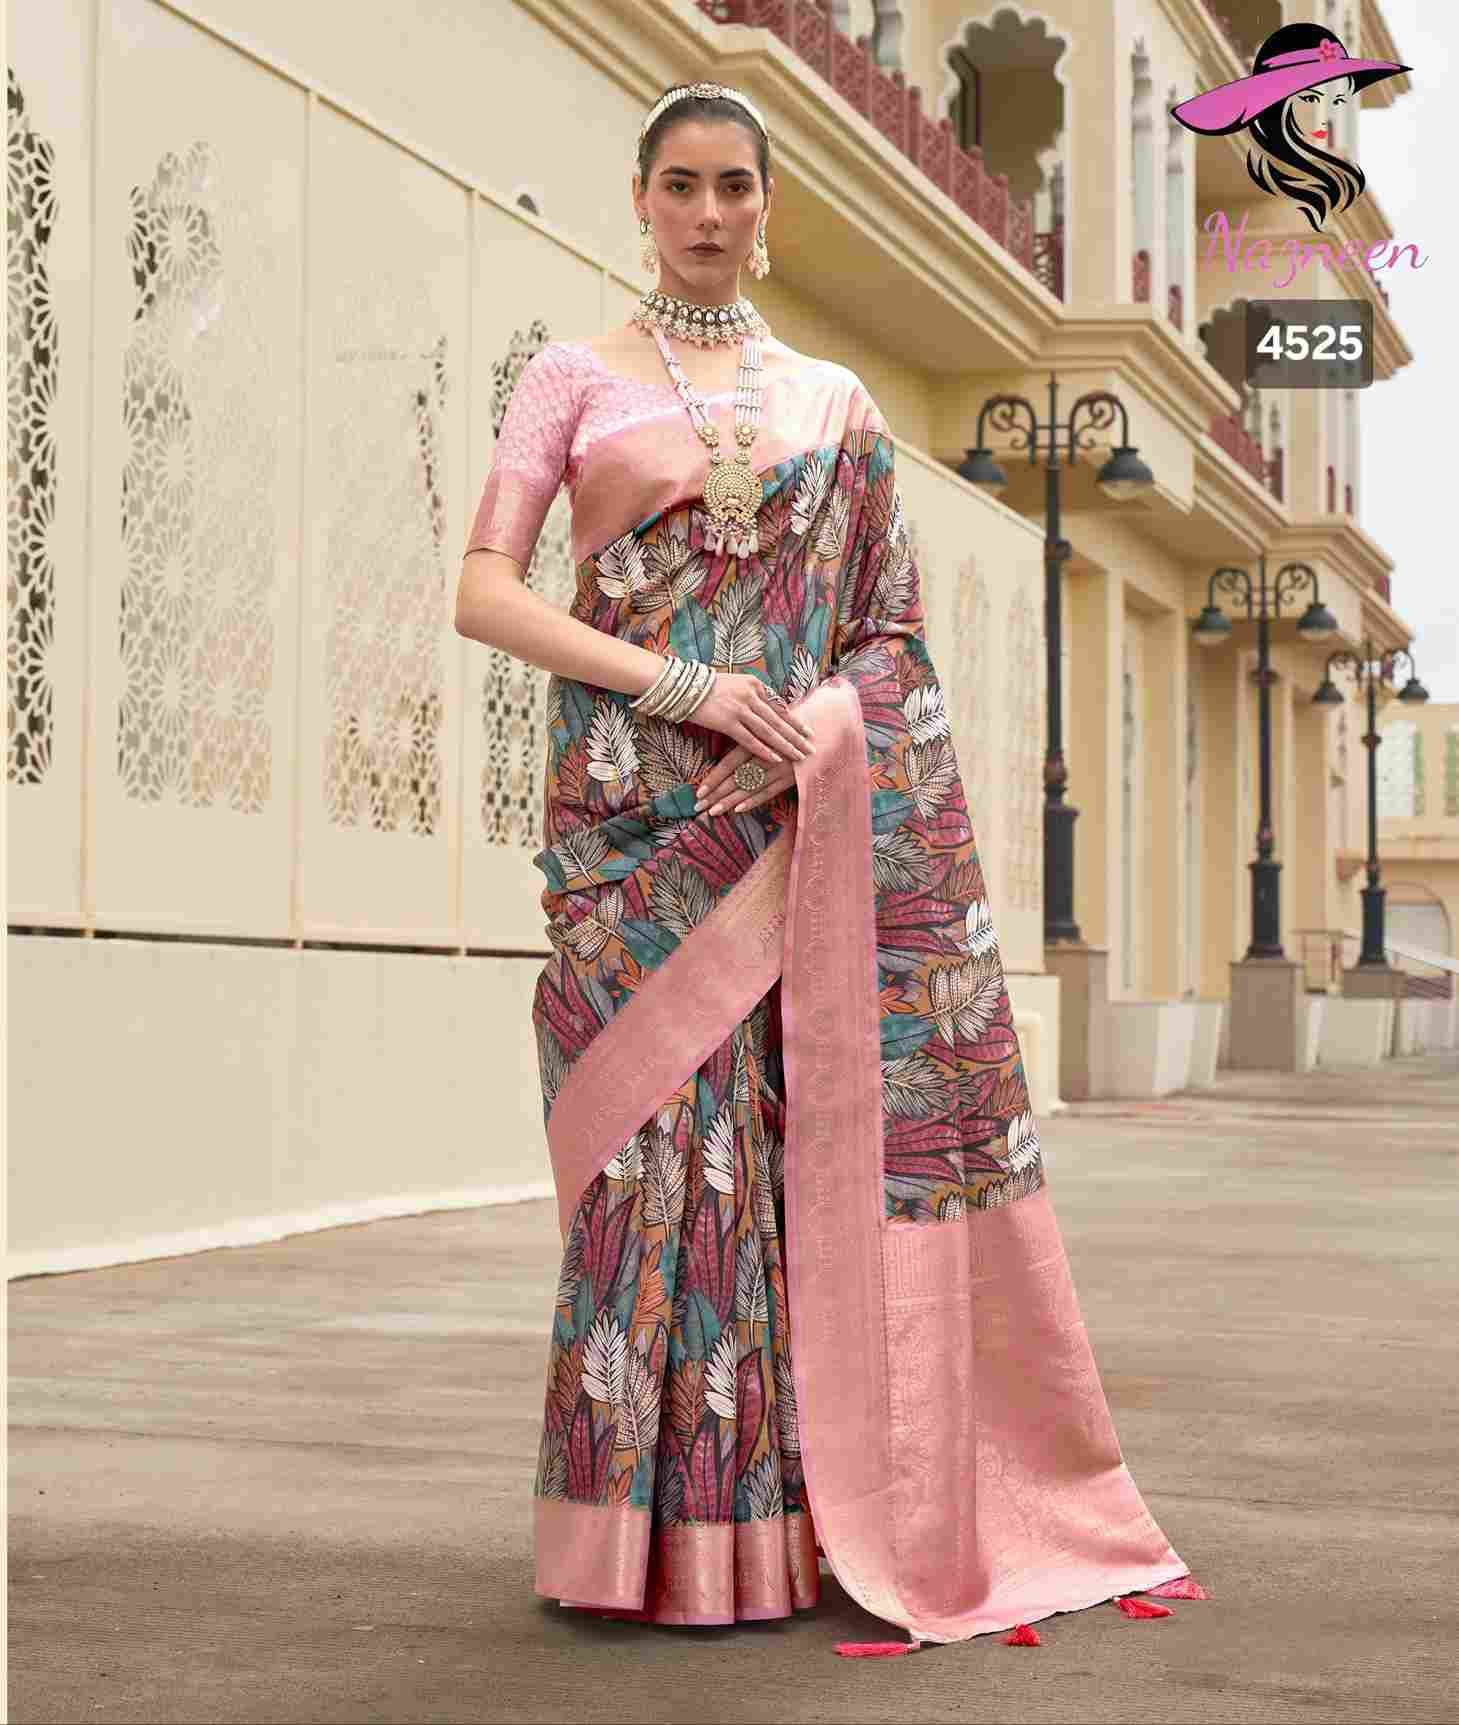 Saanjh By Nazneen 4524 To 4531 Series Indian Traditional Wear Collection Beautiful Stylish Fancy Colorful Party Wear & Occasional Wear Fancy Sarees At Wholesale Price